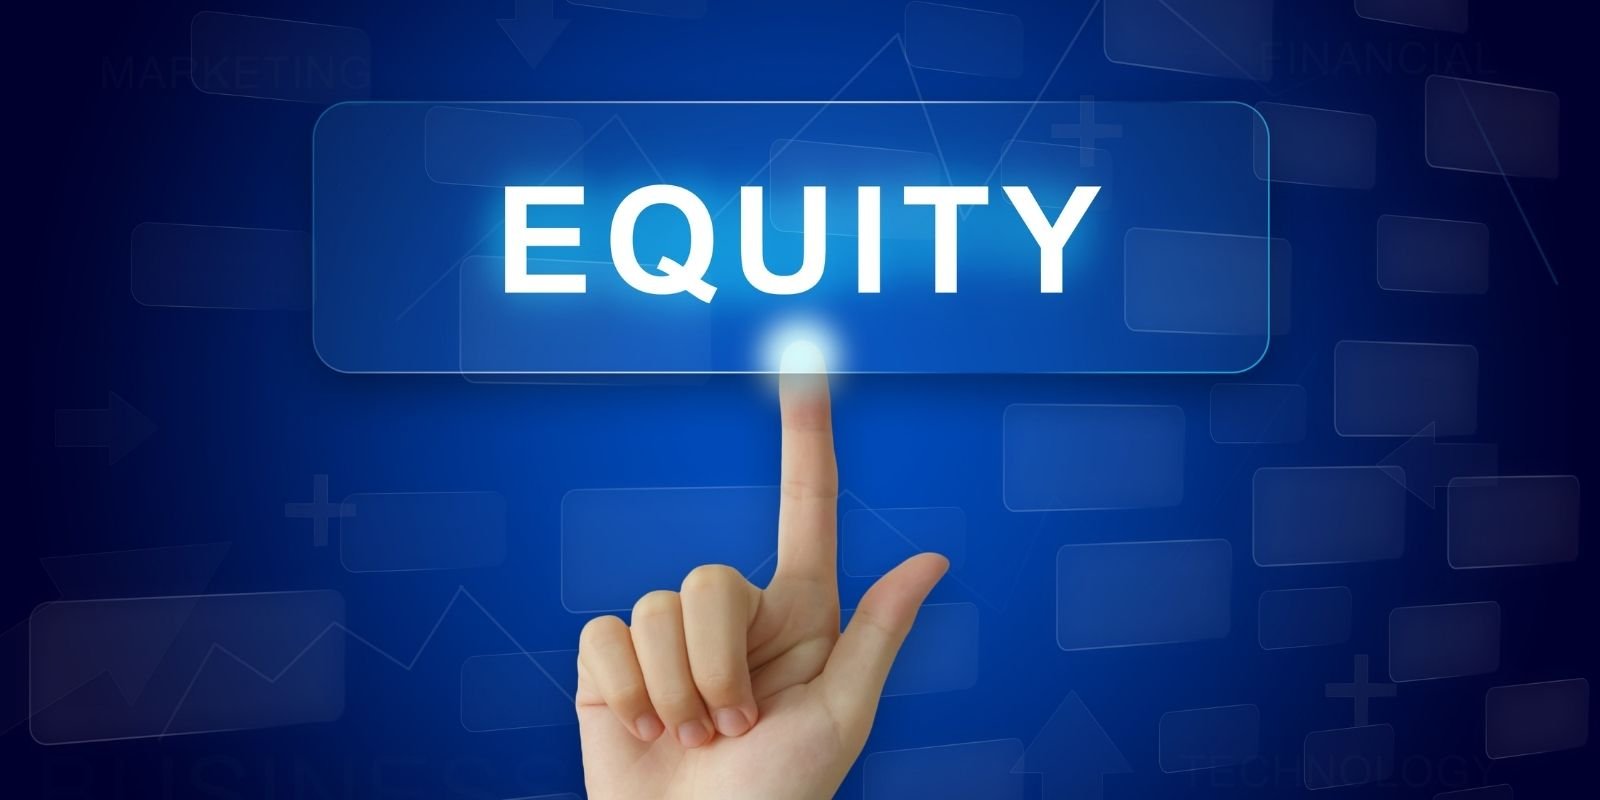 3. An Opportunity to Build Equity